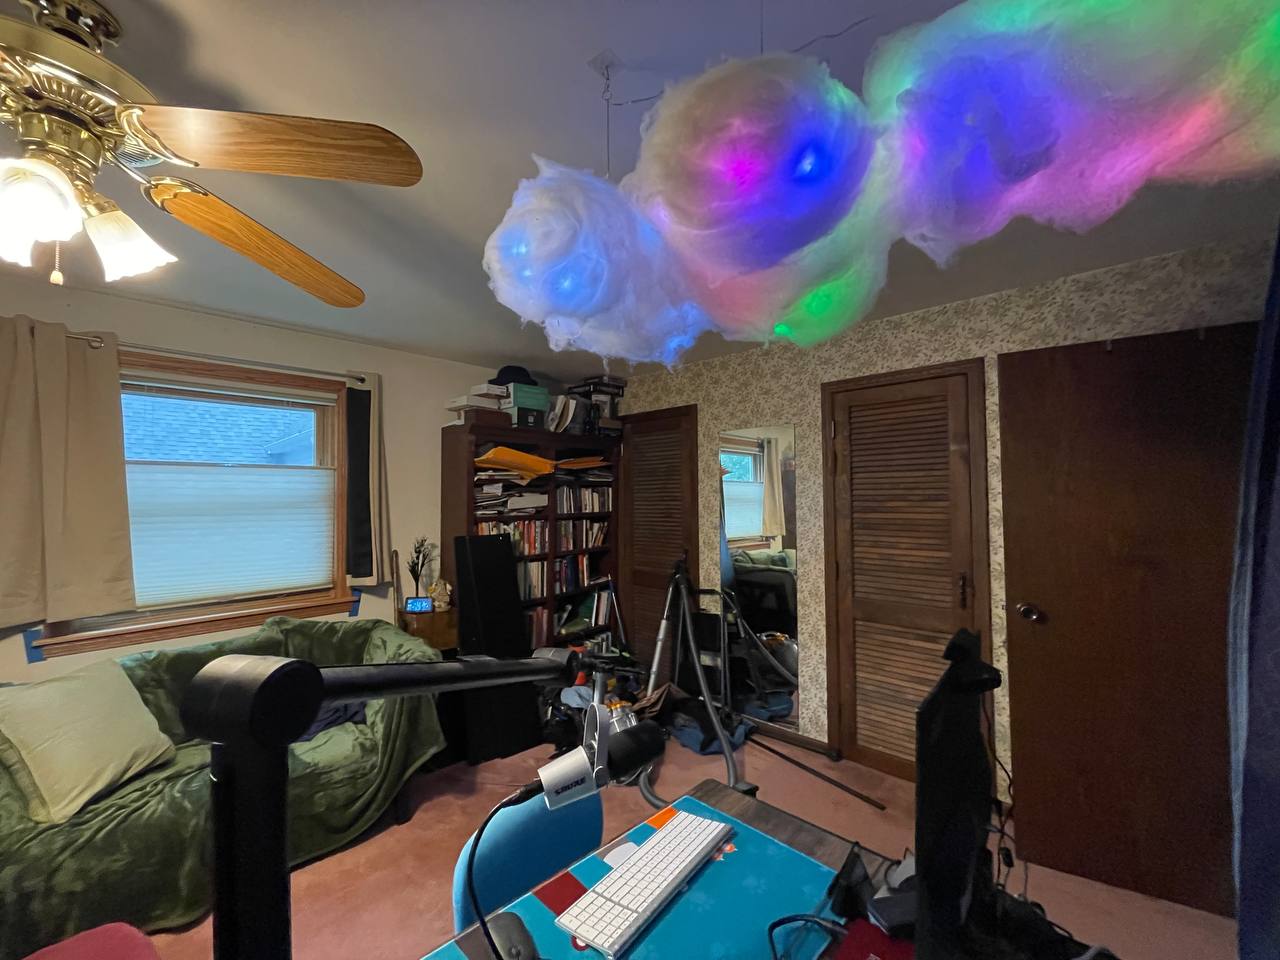 Jills recording studio after with fun colorful clouds that's fully open